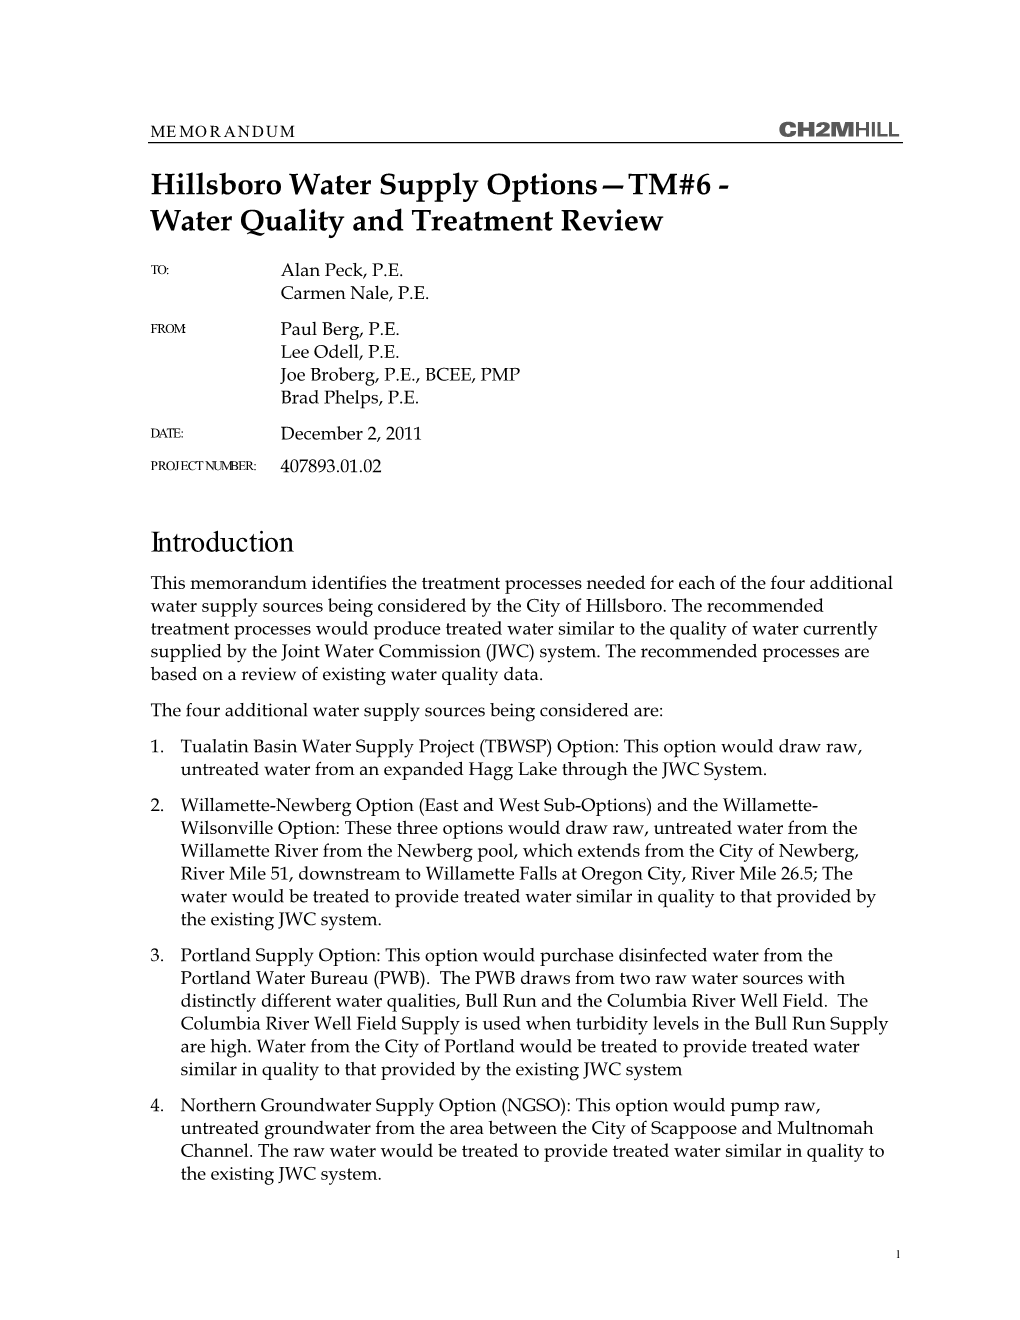 Water Quality and Treatment Review Introduction